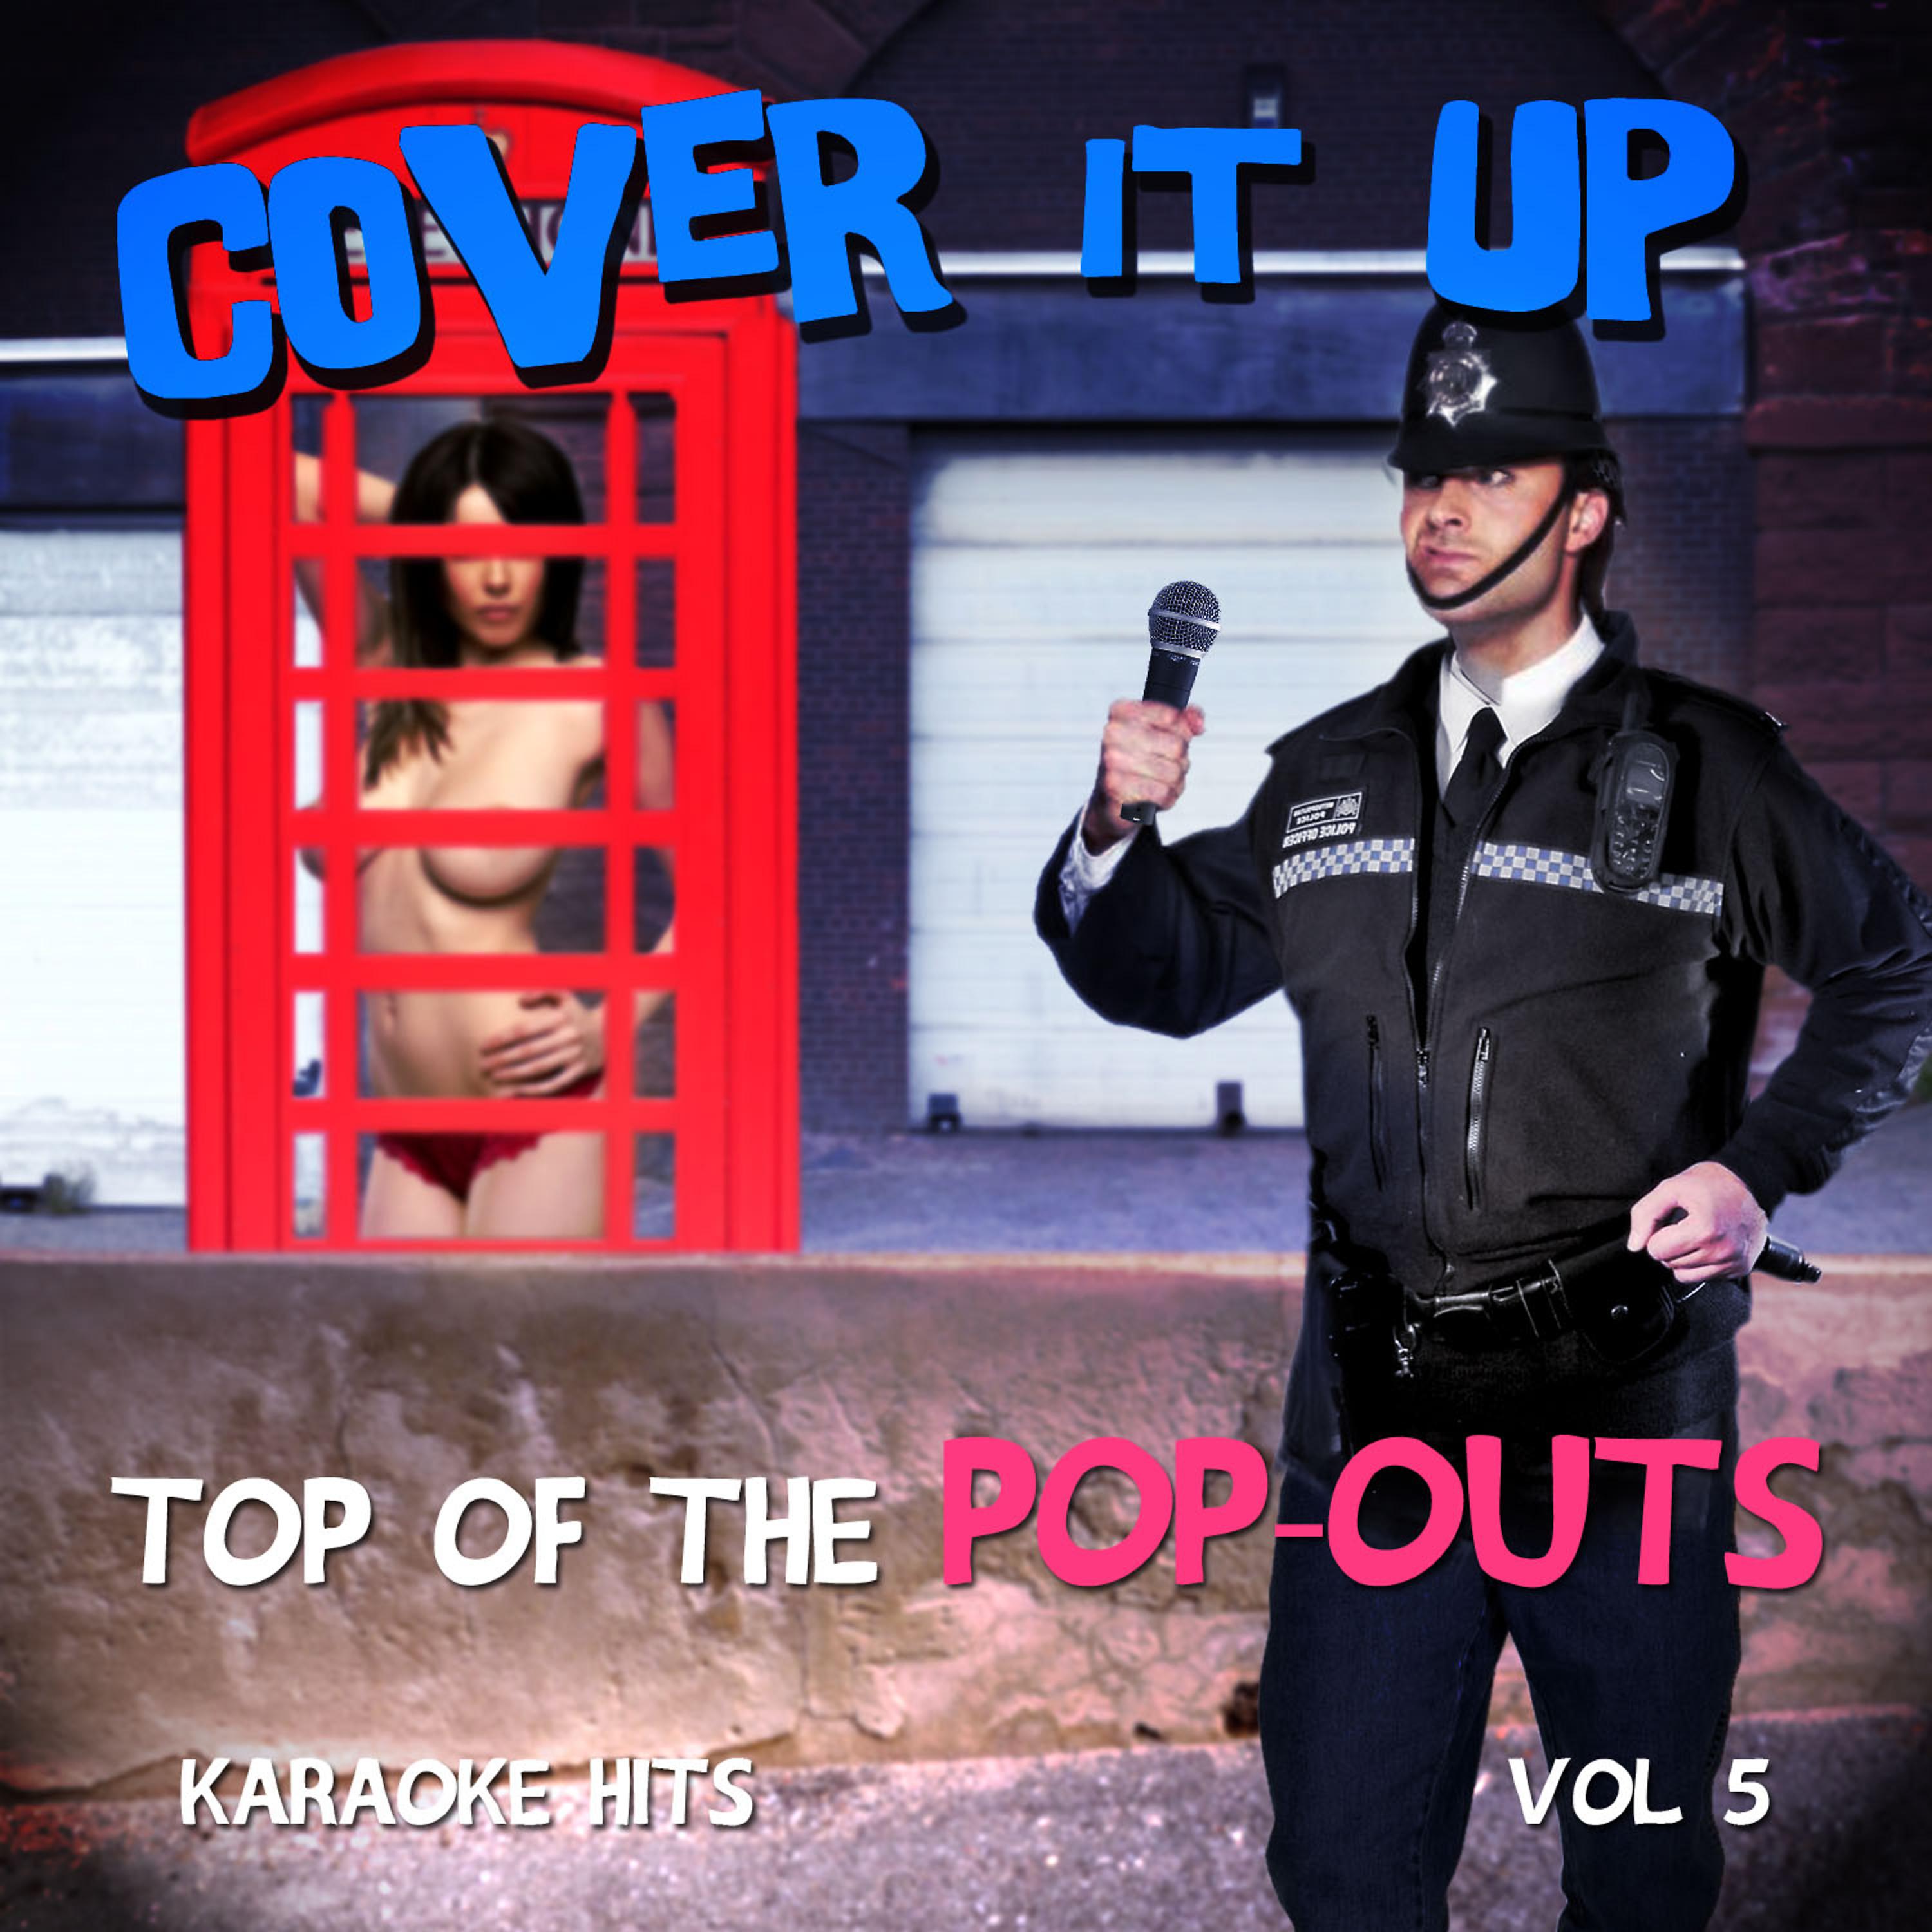 Постер альбома Cover It up, Top of the Pop-Outs - Karaoke Hits, Vol. 5